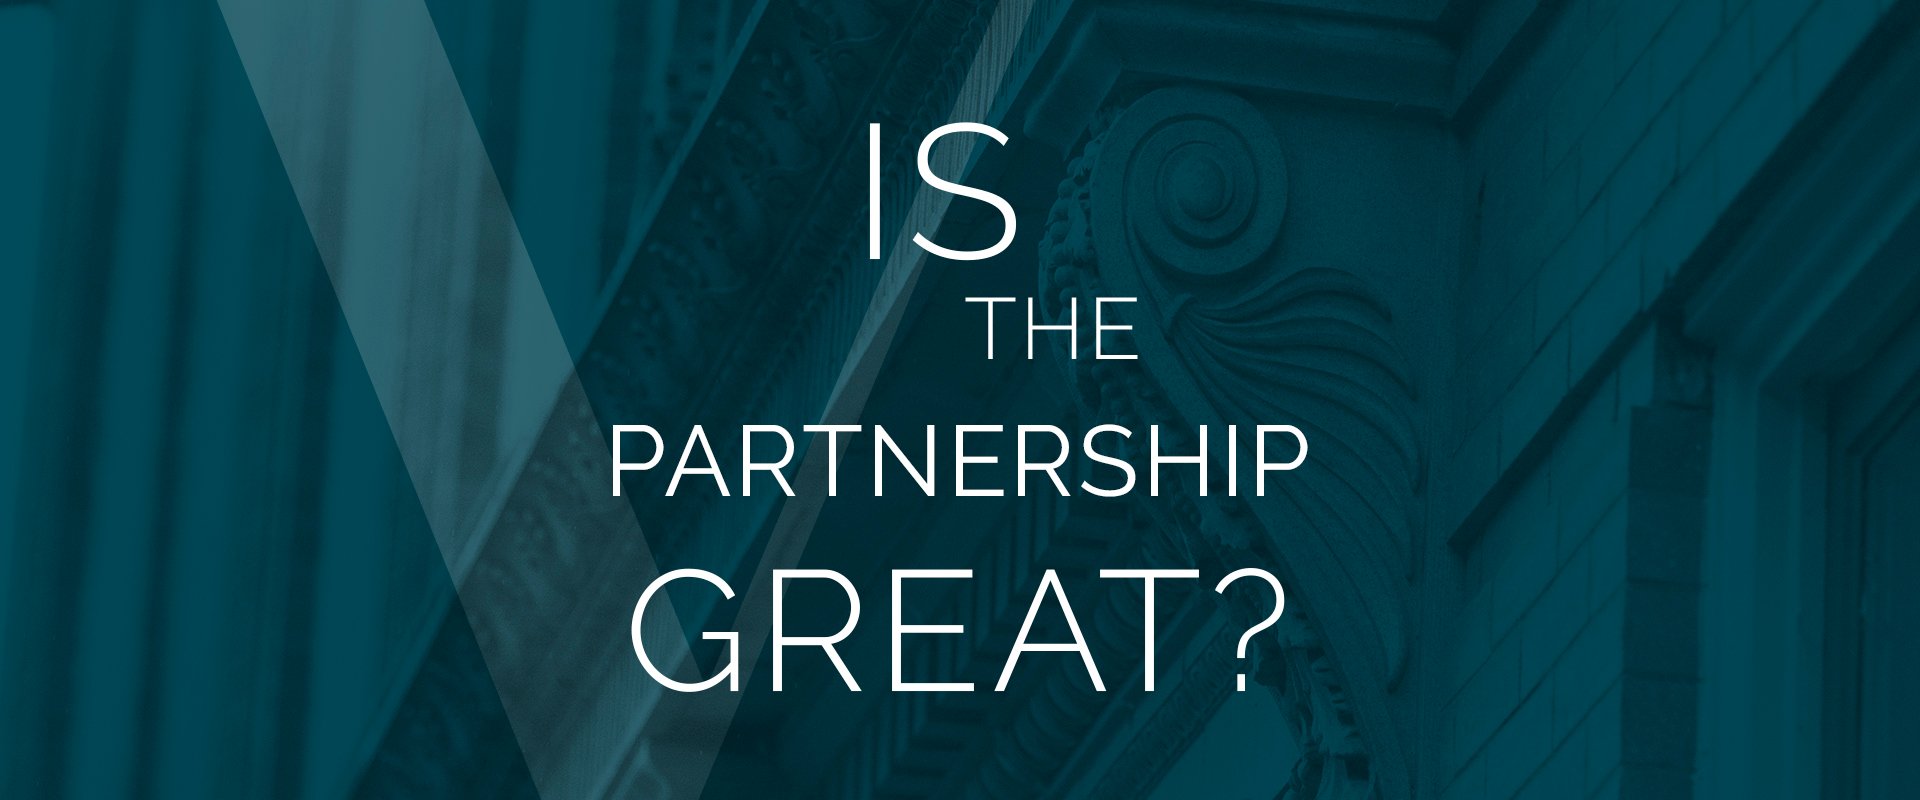 Is the Partnership Great?